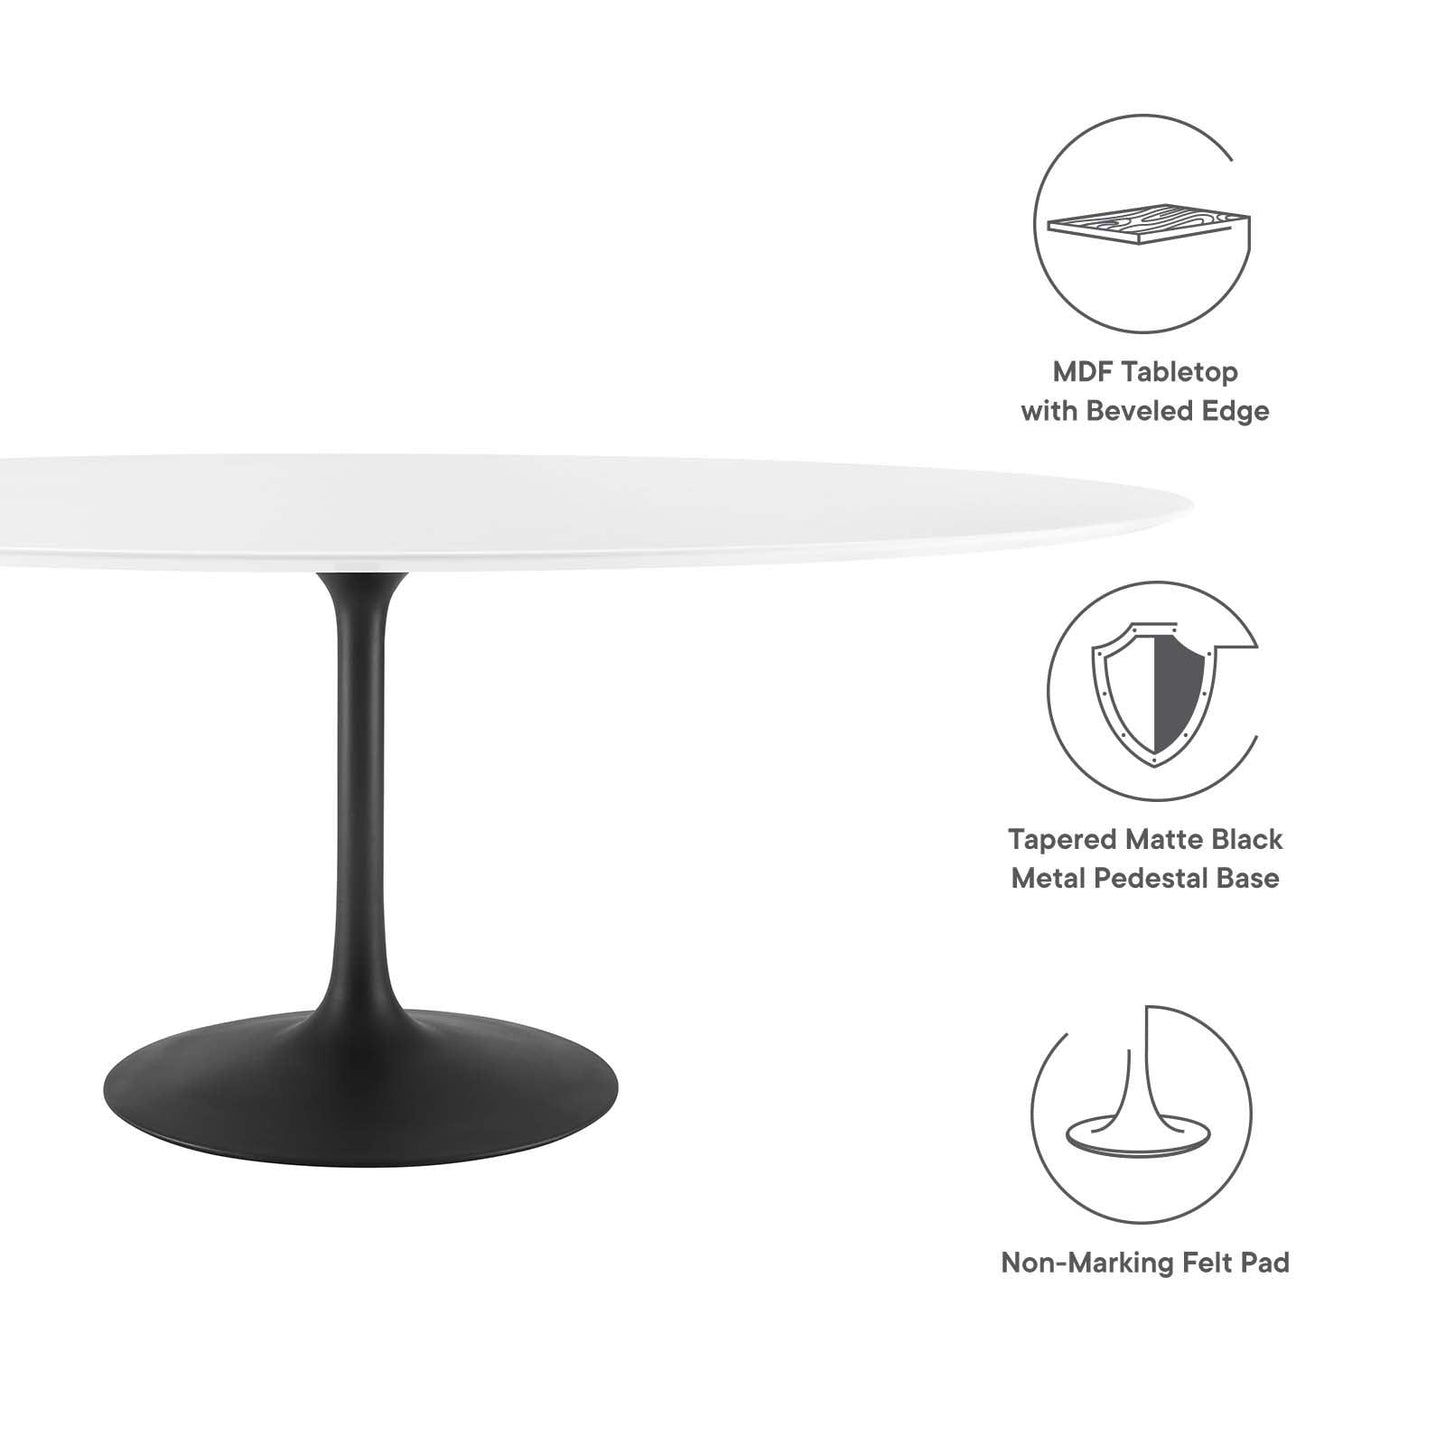 Modway Lippa 78" Oval Dining Table FredCo